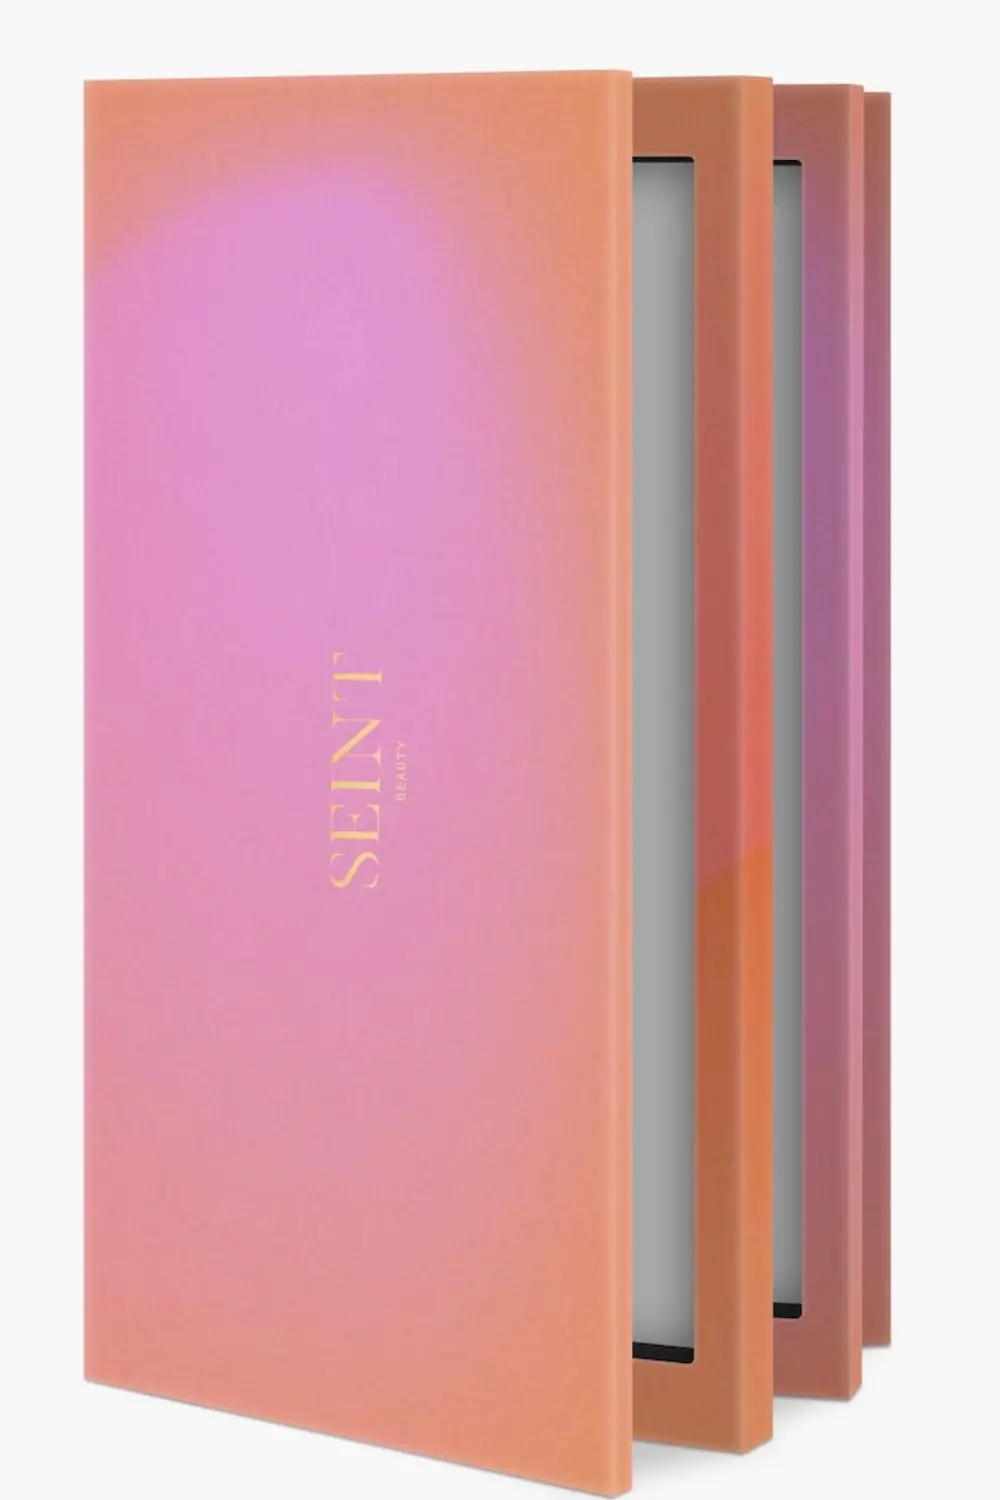 Seint New Releases Palettes